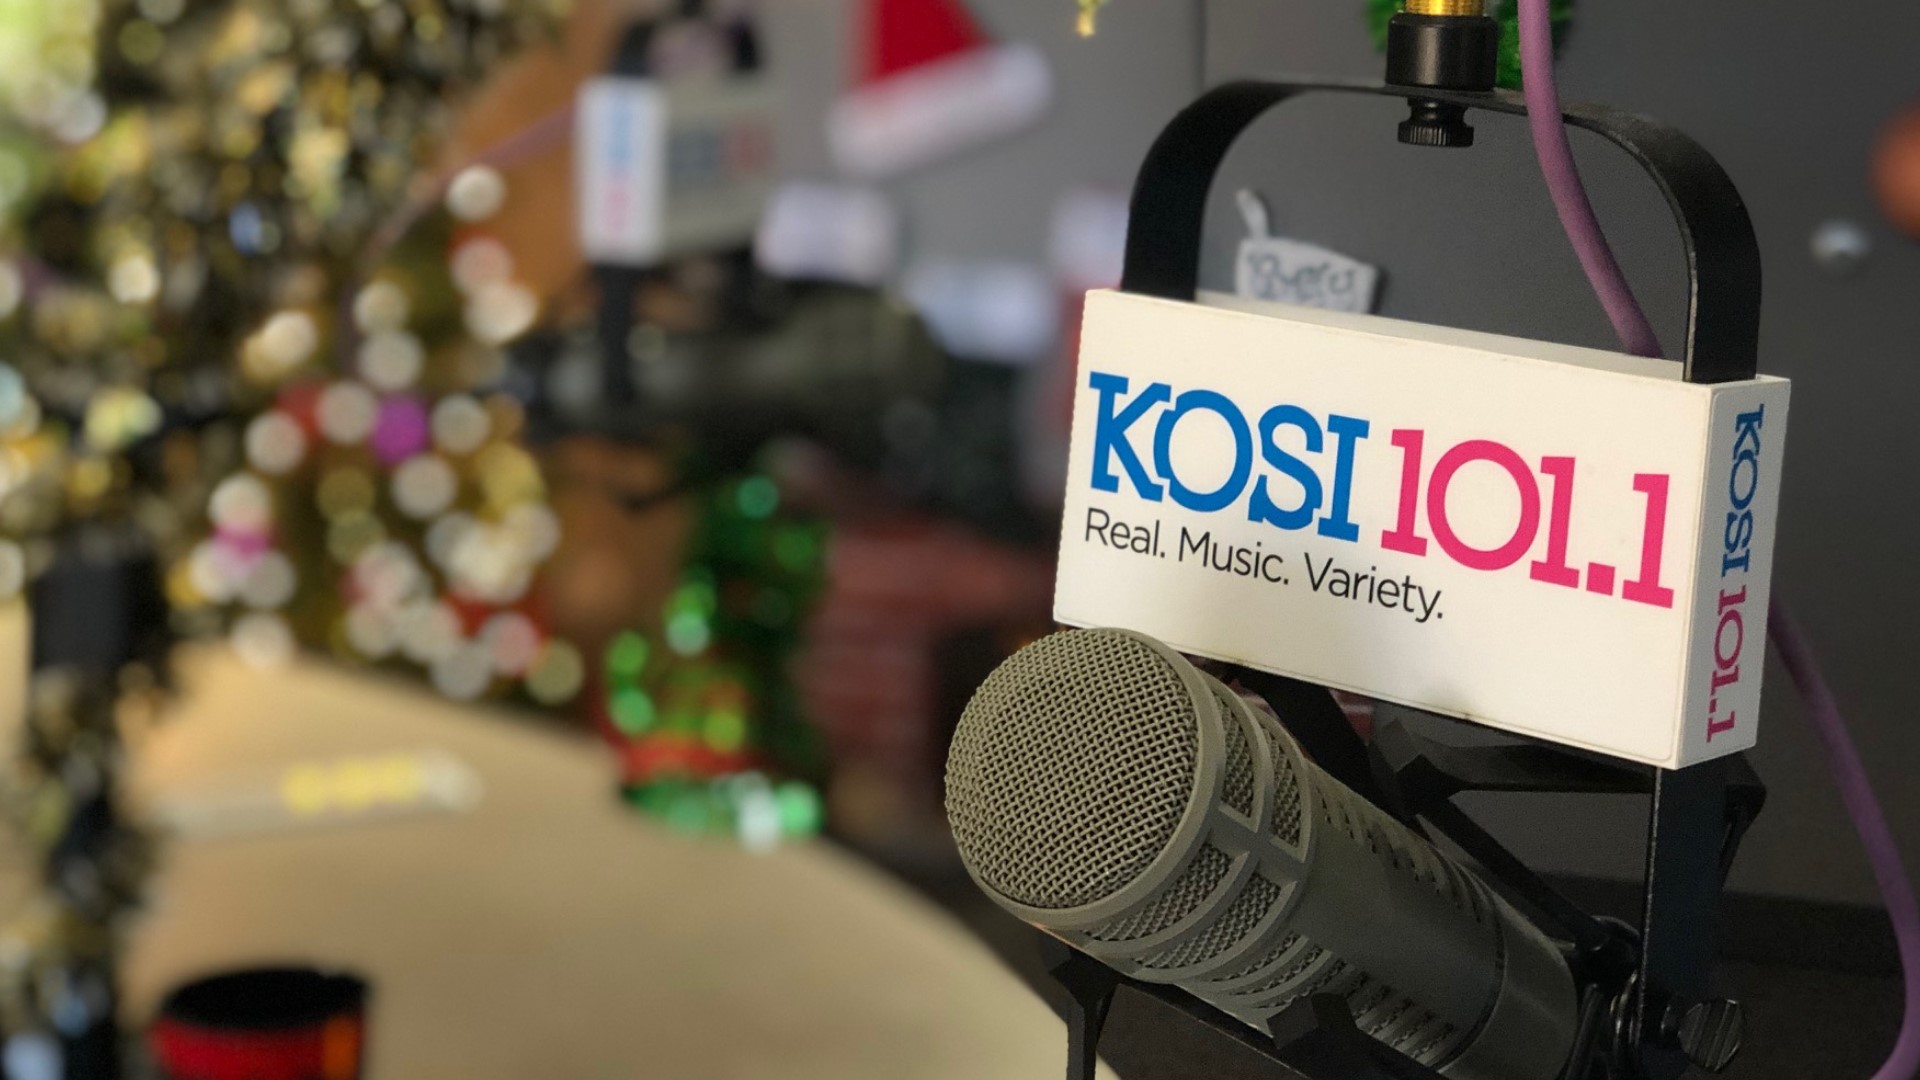 For the 21st year, KOSI 101.1 will change to an all-Christmas music format. The annual Denver tradition attracts over a million local listeners each week.